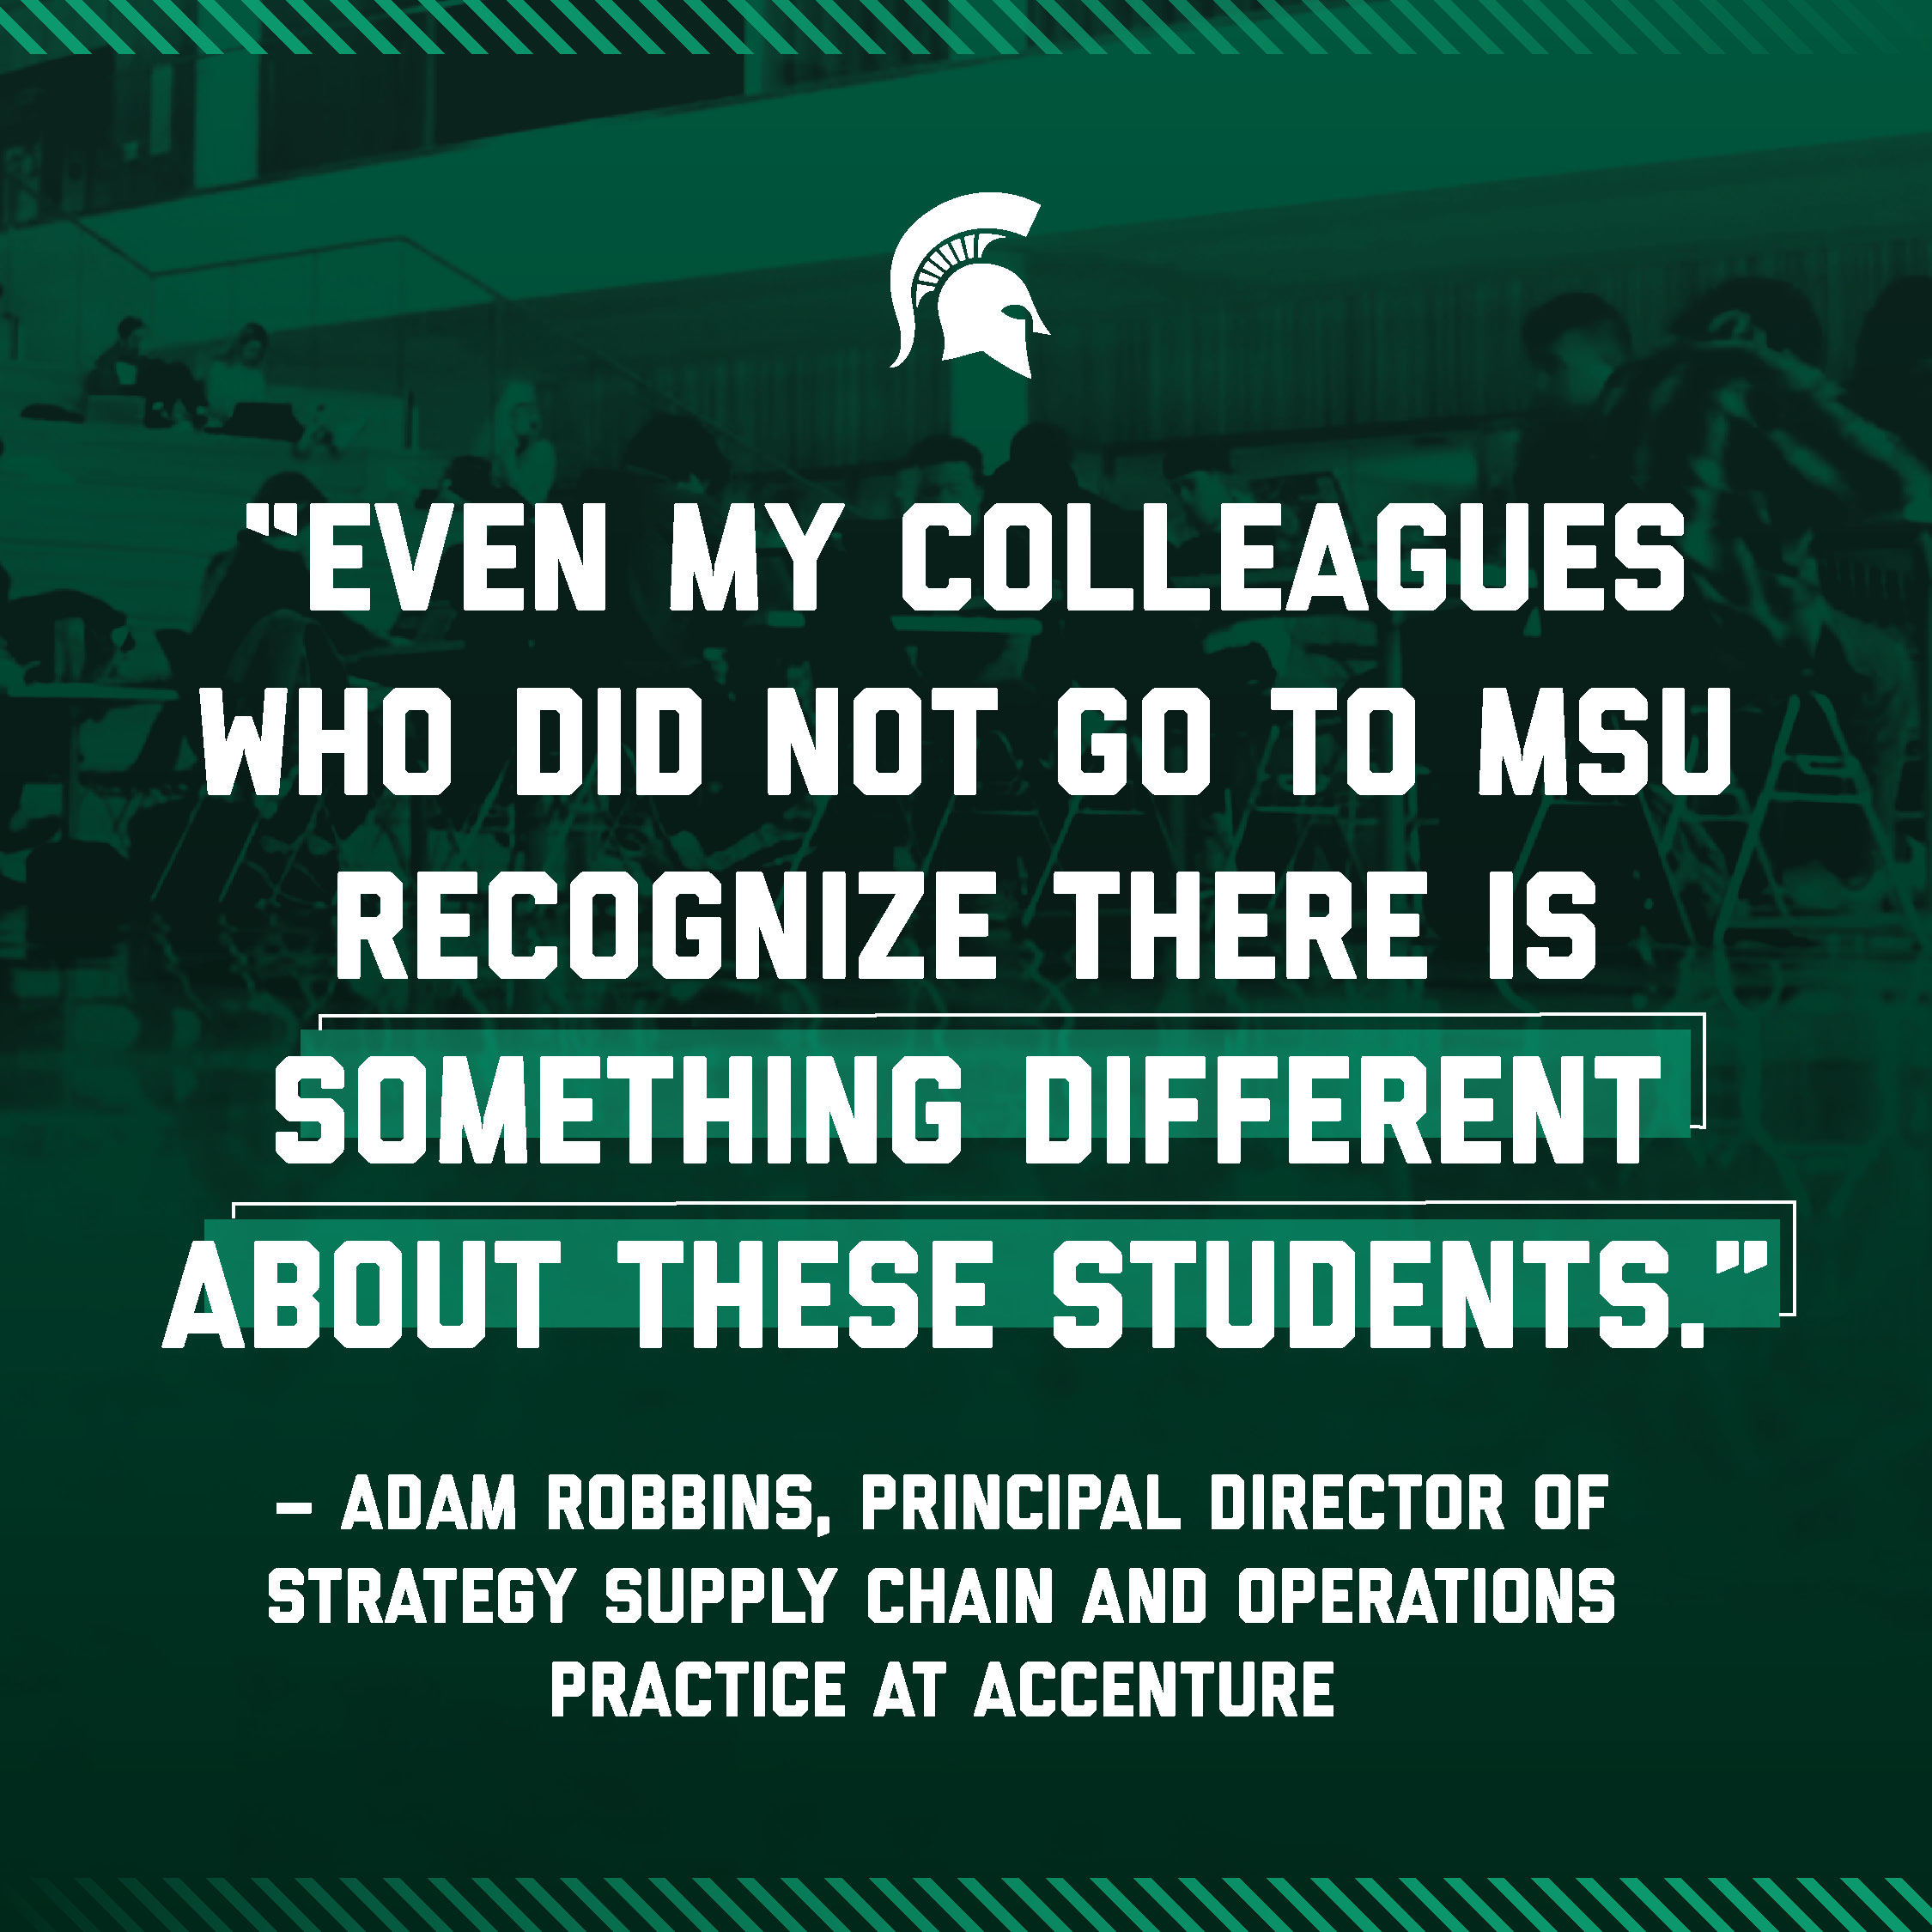 “Even my colleagues who did not go to MSU recognize there is something different about these students.